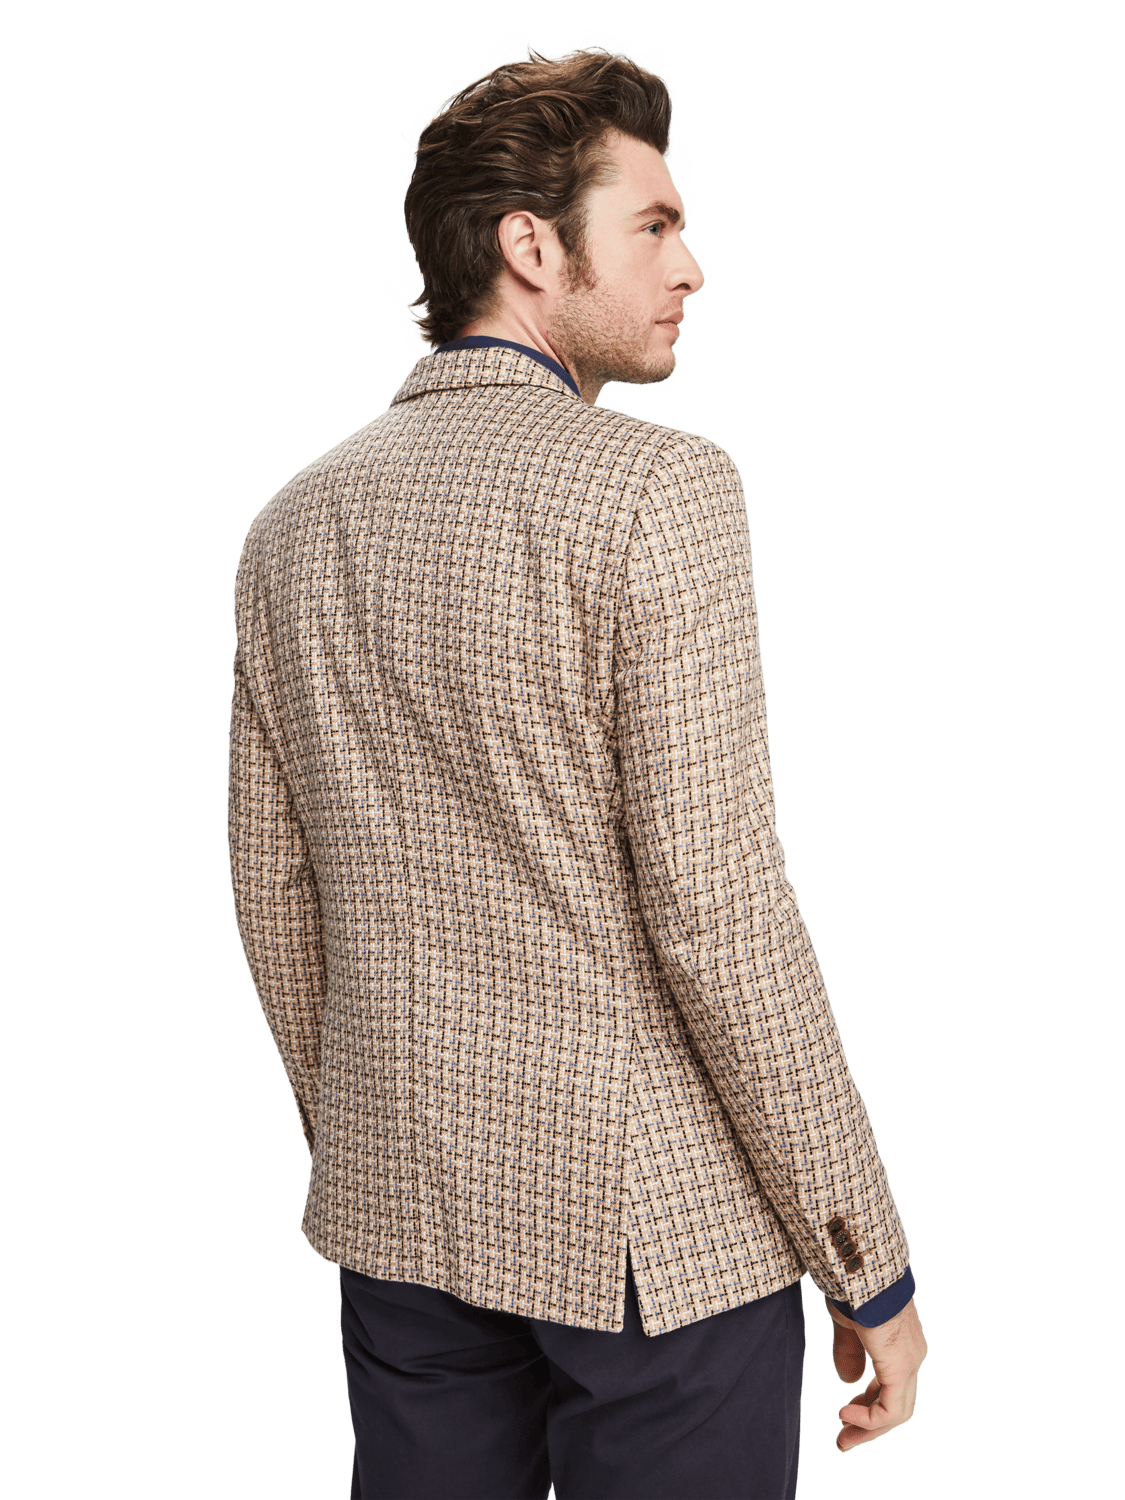 Scotch & Soda Classic Singlbreasted Blazer in Yarn-Dyed Pattern décontracté Homme 